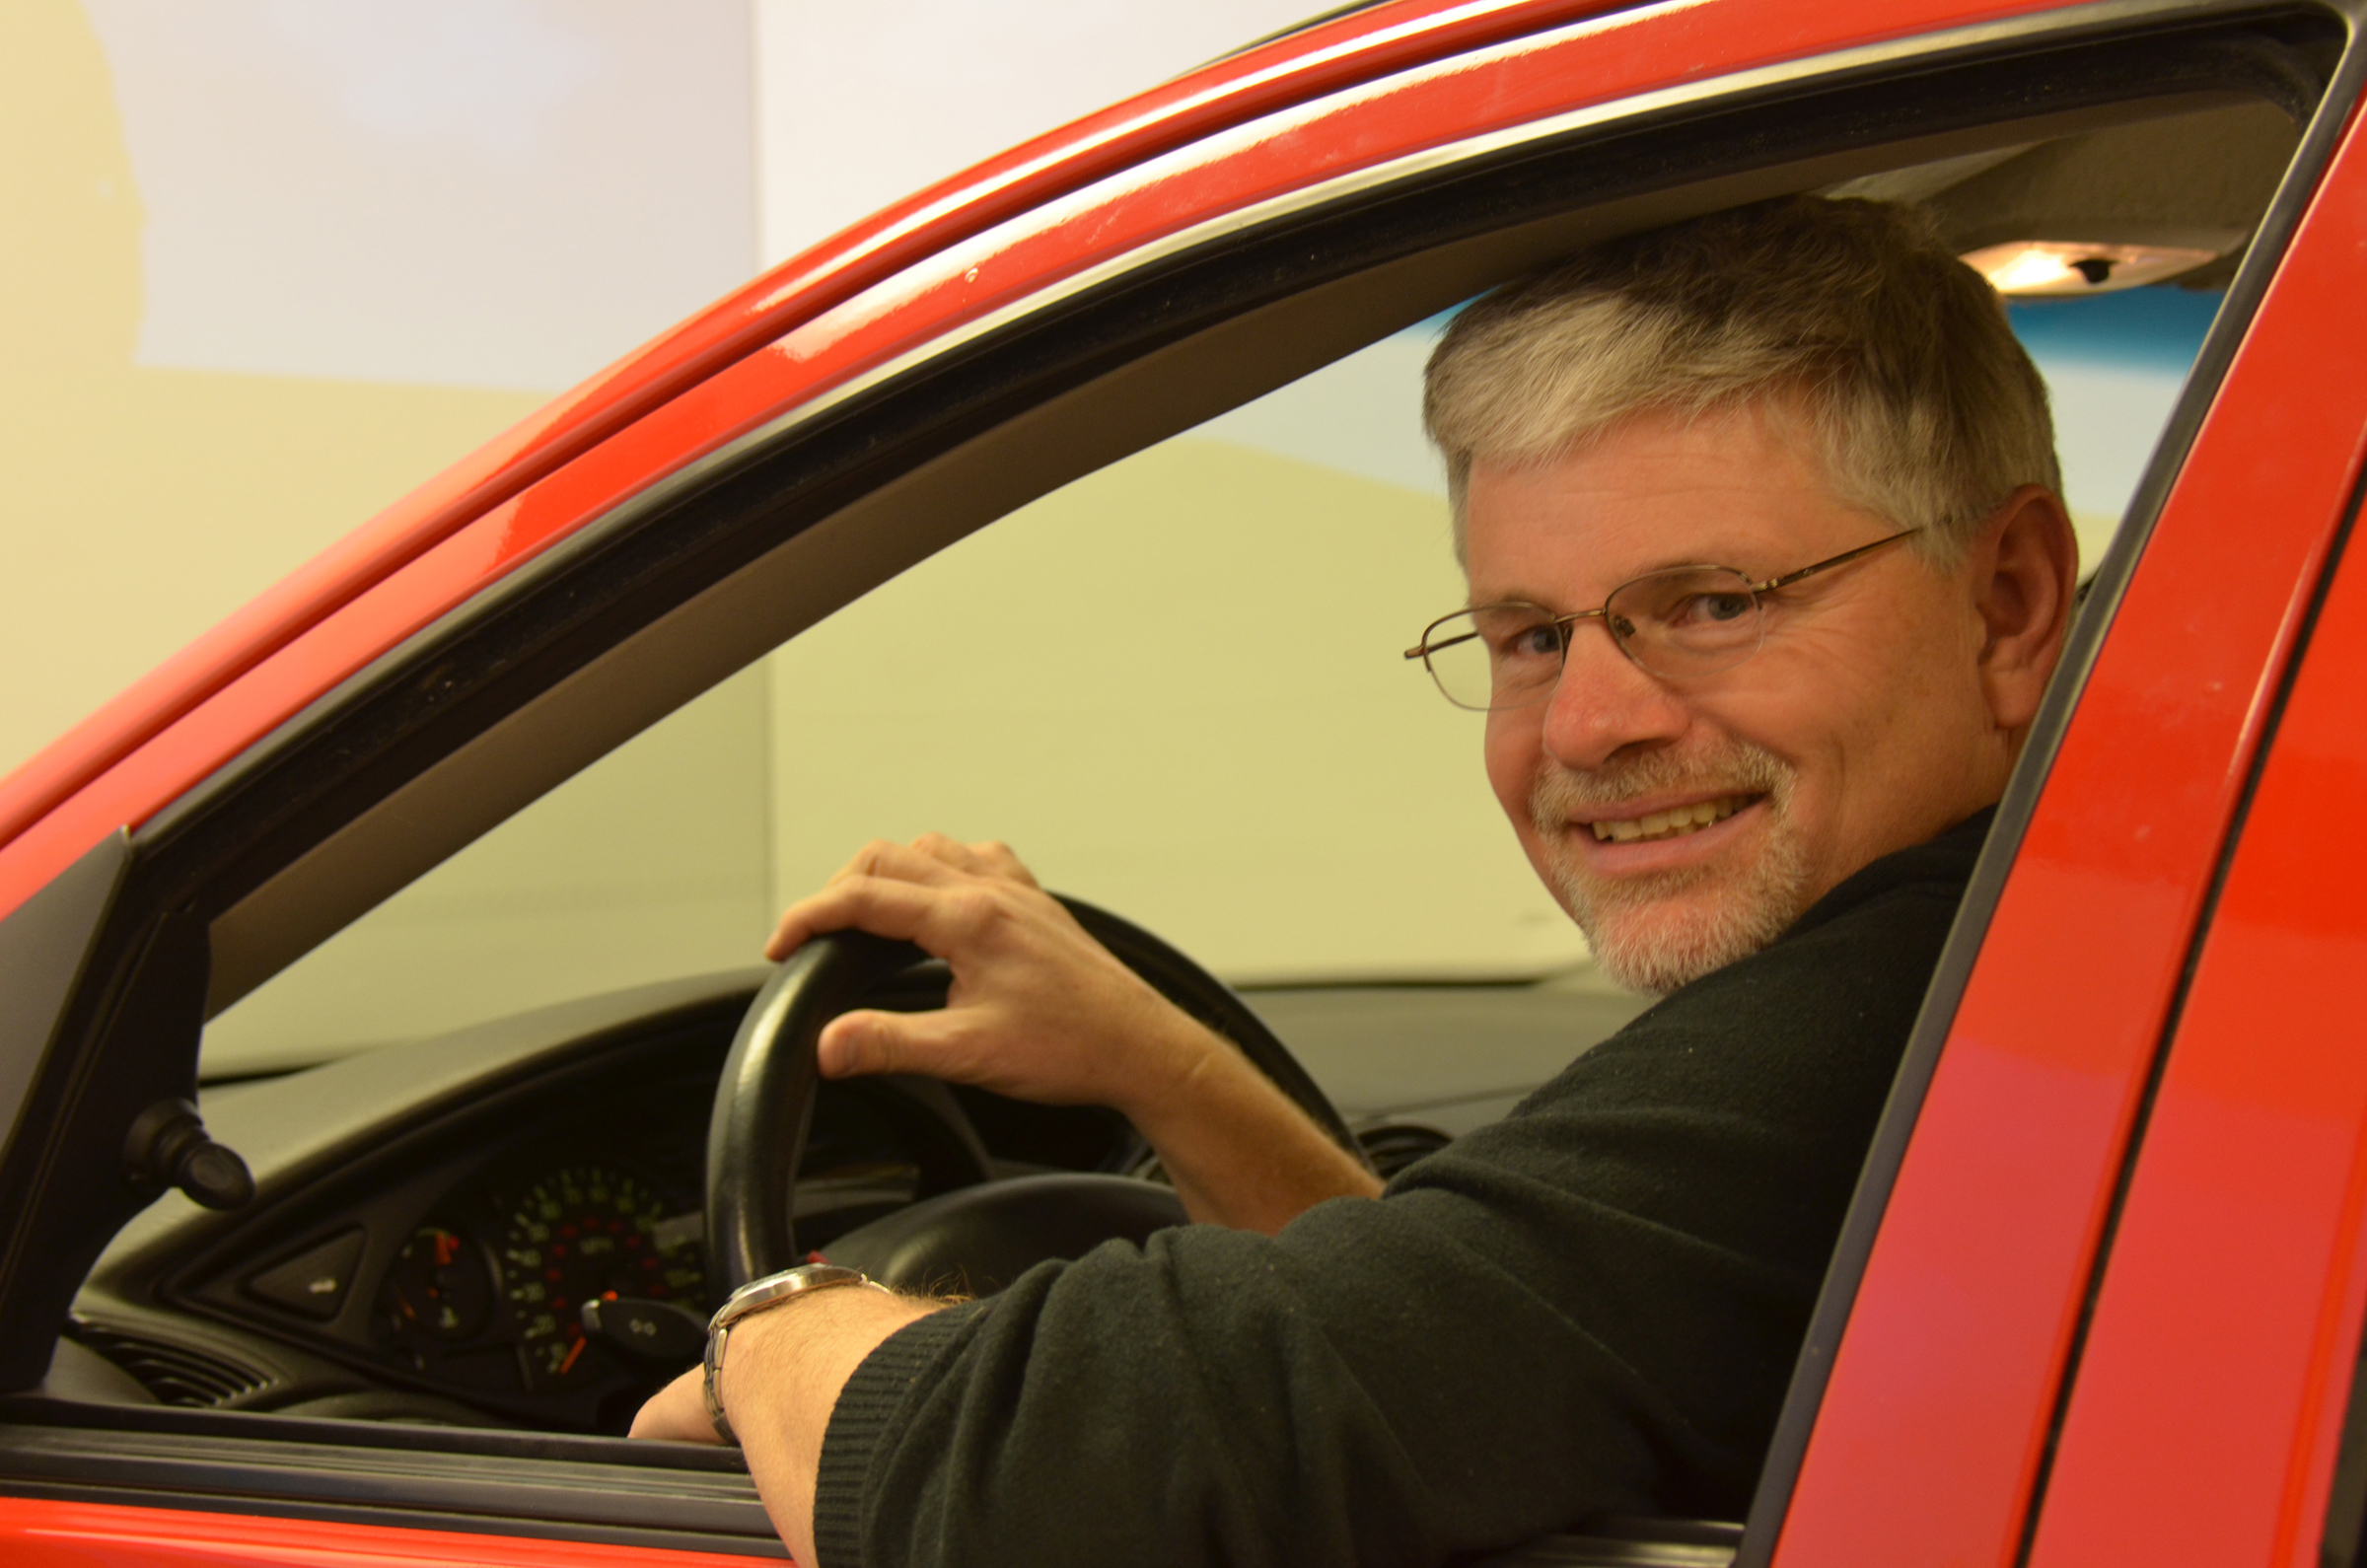 David Strayer, a University of Utah psychology professor, with a driving simulator that was part of a major new study he conducted for the AAA Foundation for Traffic Safety. The study found that, contrary to what many people believe, motorists are seriously distracted and put themselves and others at risk when they use hands-free devices to make cell phone calls, use social media or send texts or e-mails while driving.